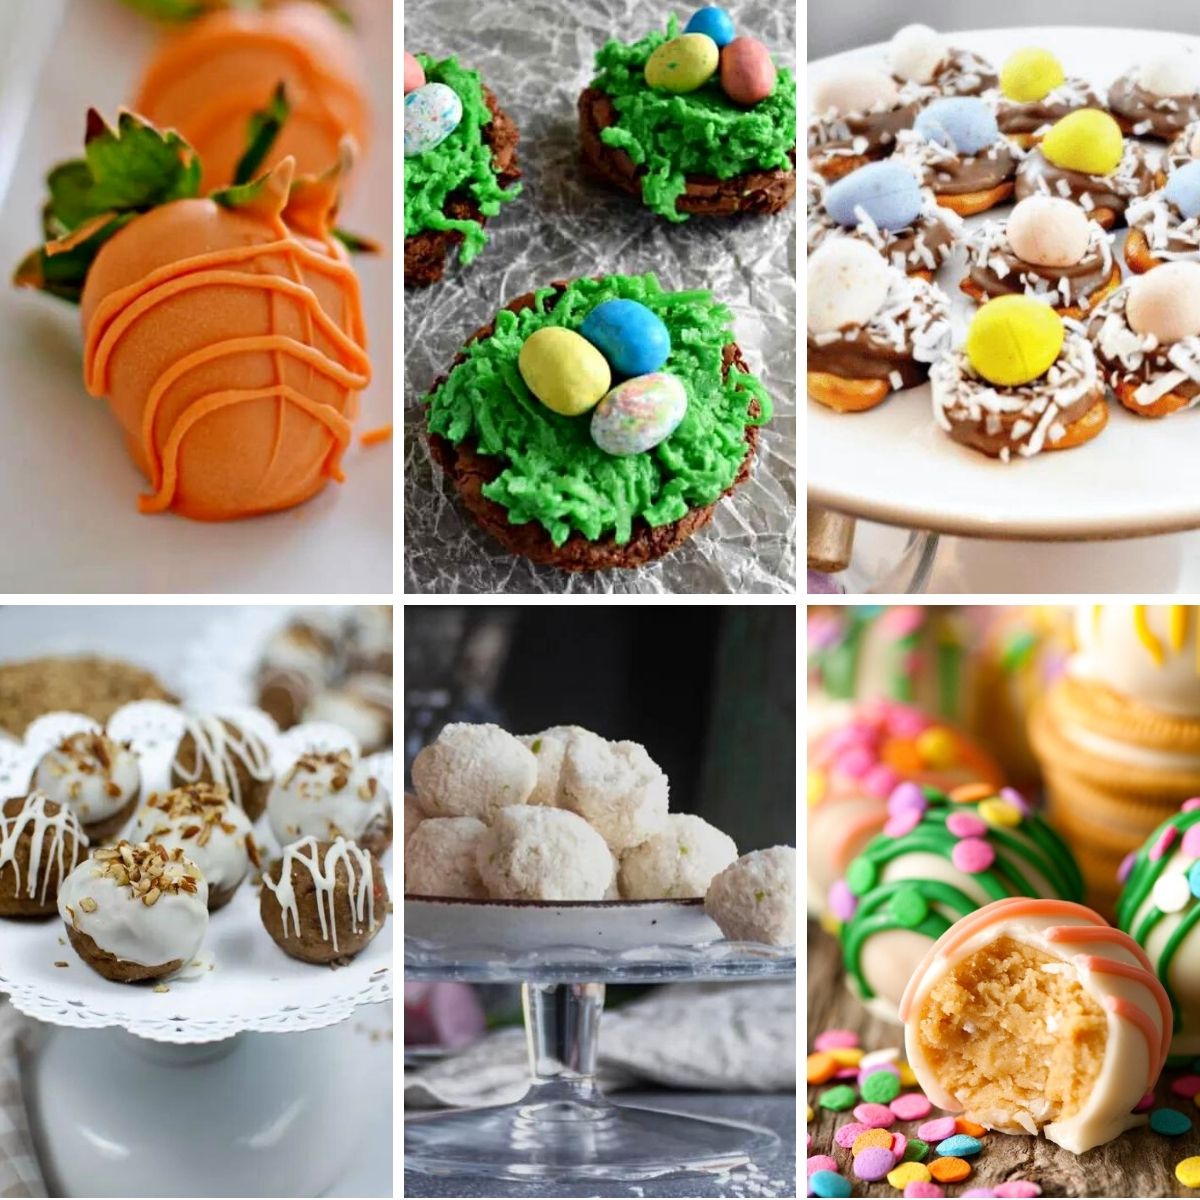 Collage of Easter Treats including carrot strawberries, brownie nests, and truffles